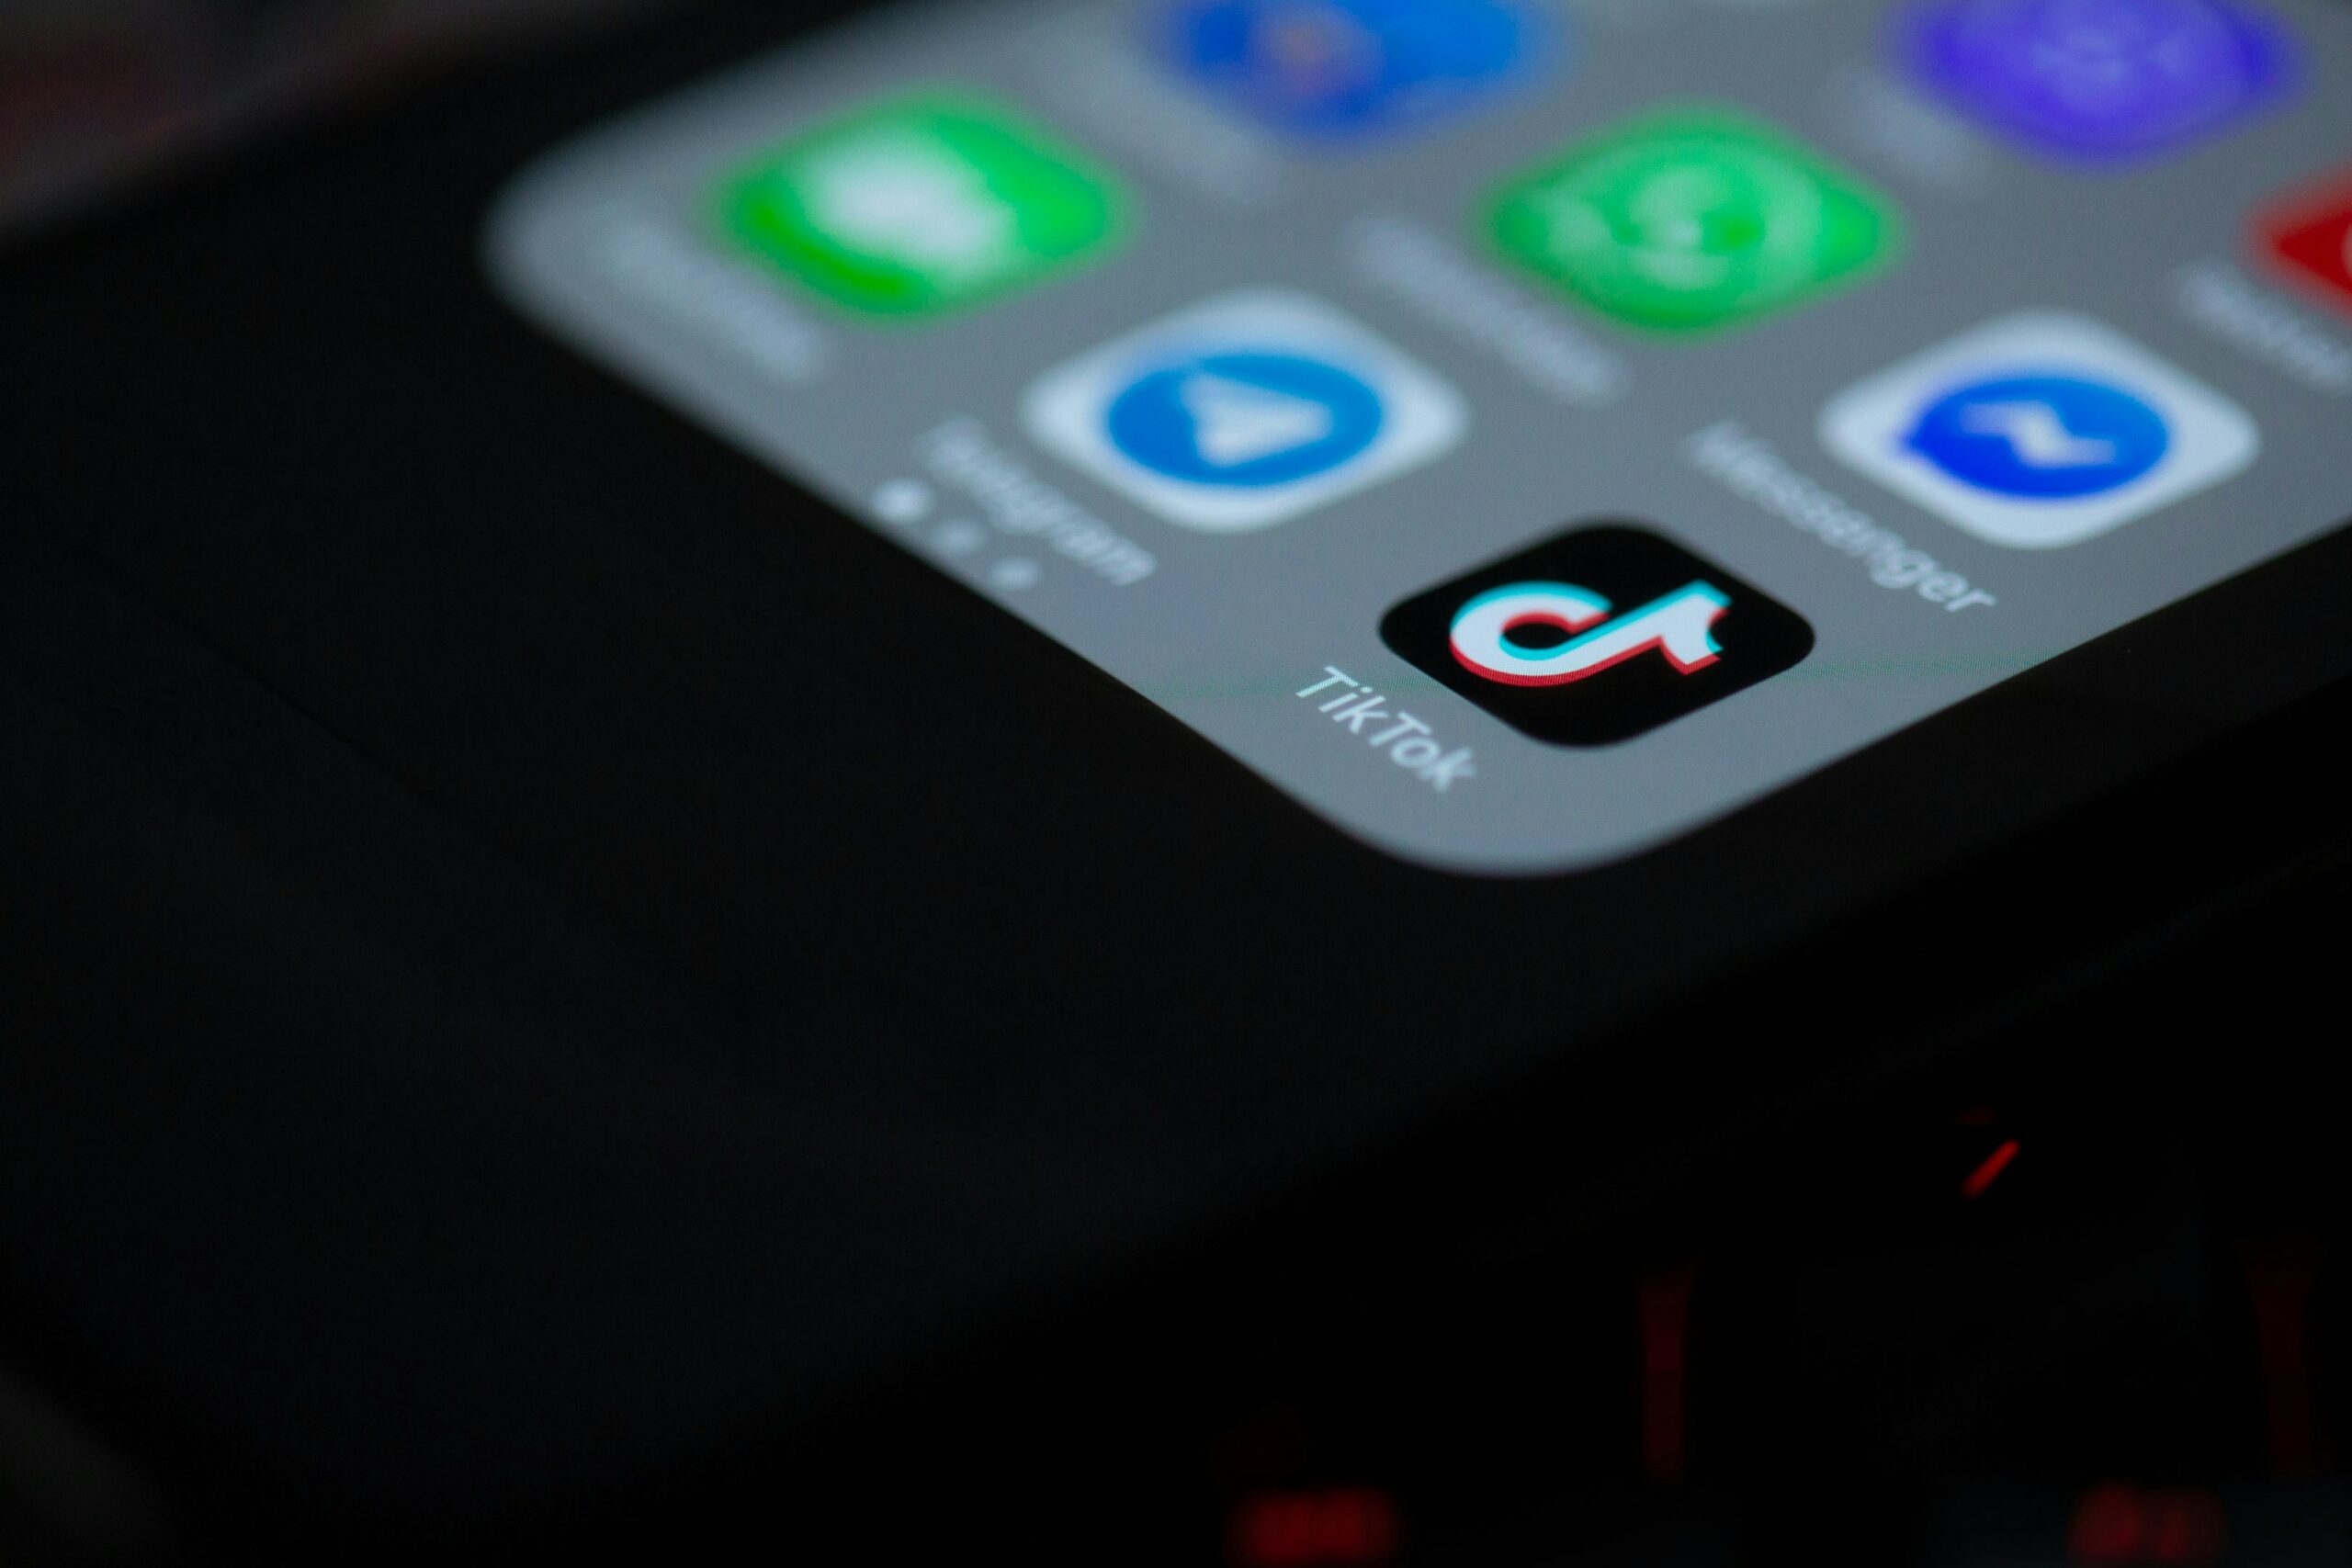 Photo of a cell phone lying on a black background, the TikTok app icon visible in the lower righthand corner of the phone.